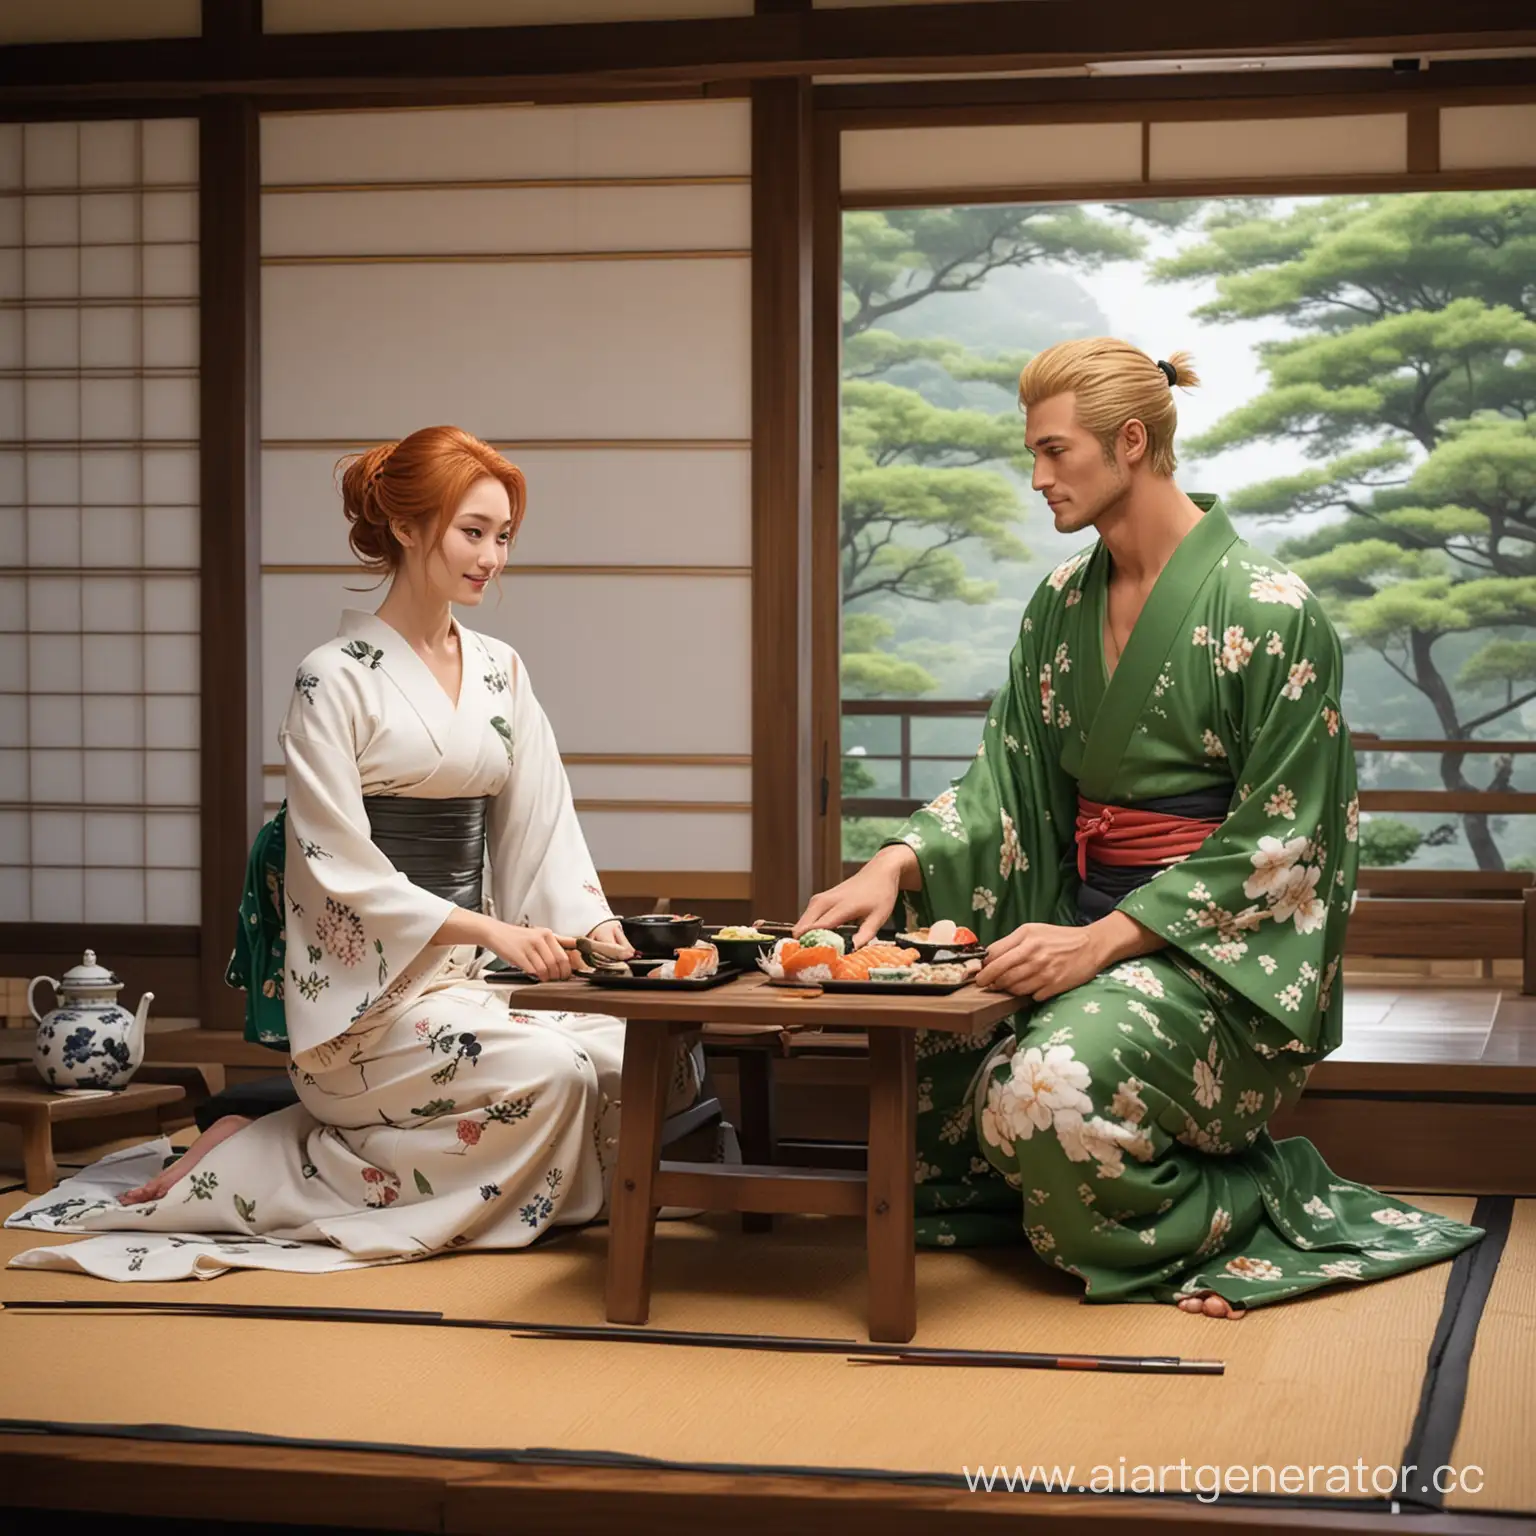 Nami and Zoro having a romantic sushi dinner in a traditional Japanese house and dressed with white and green simple kimonos